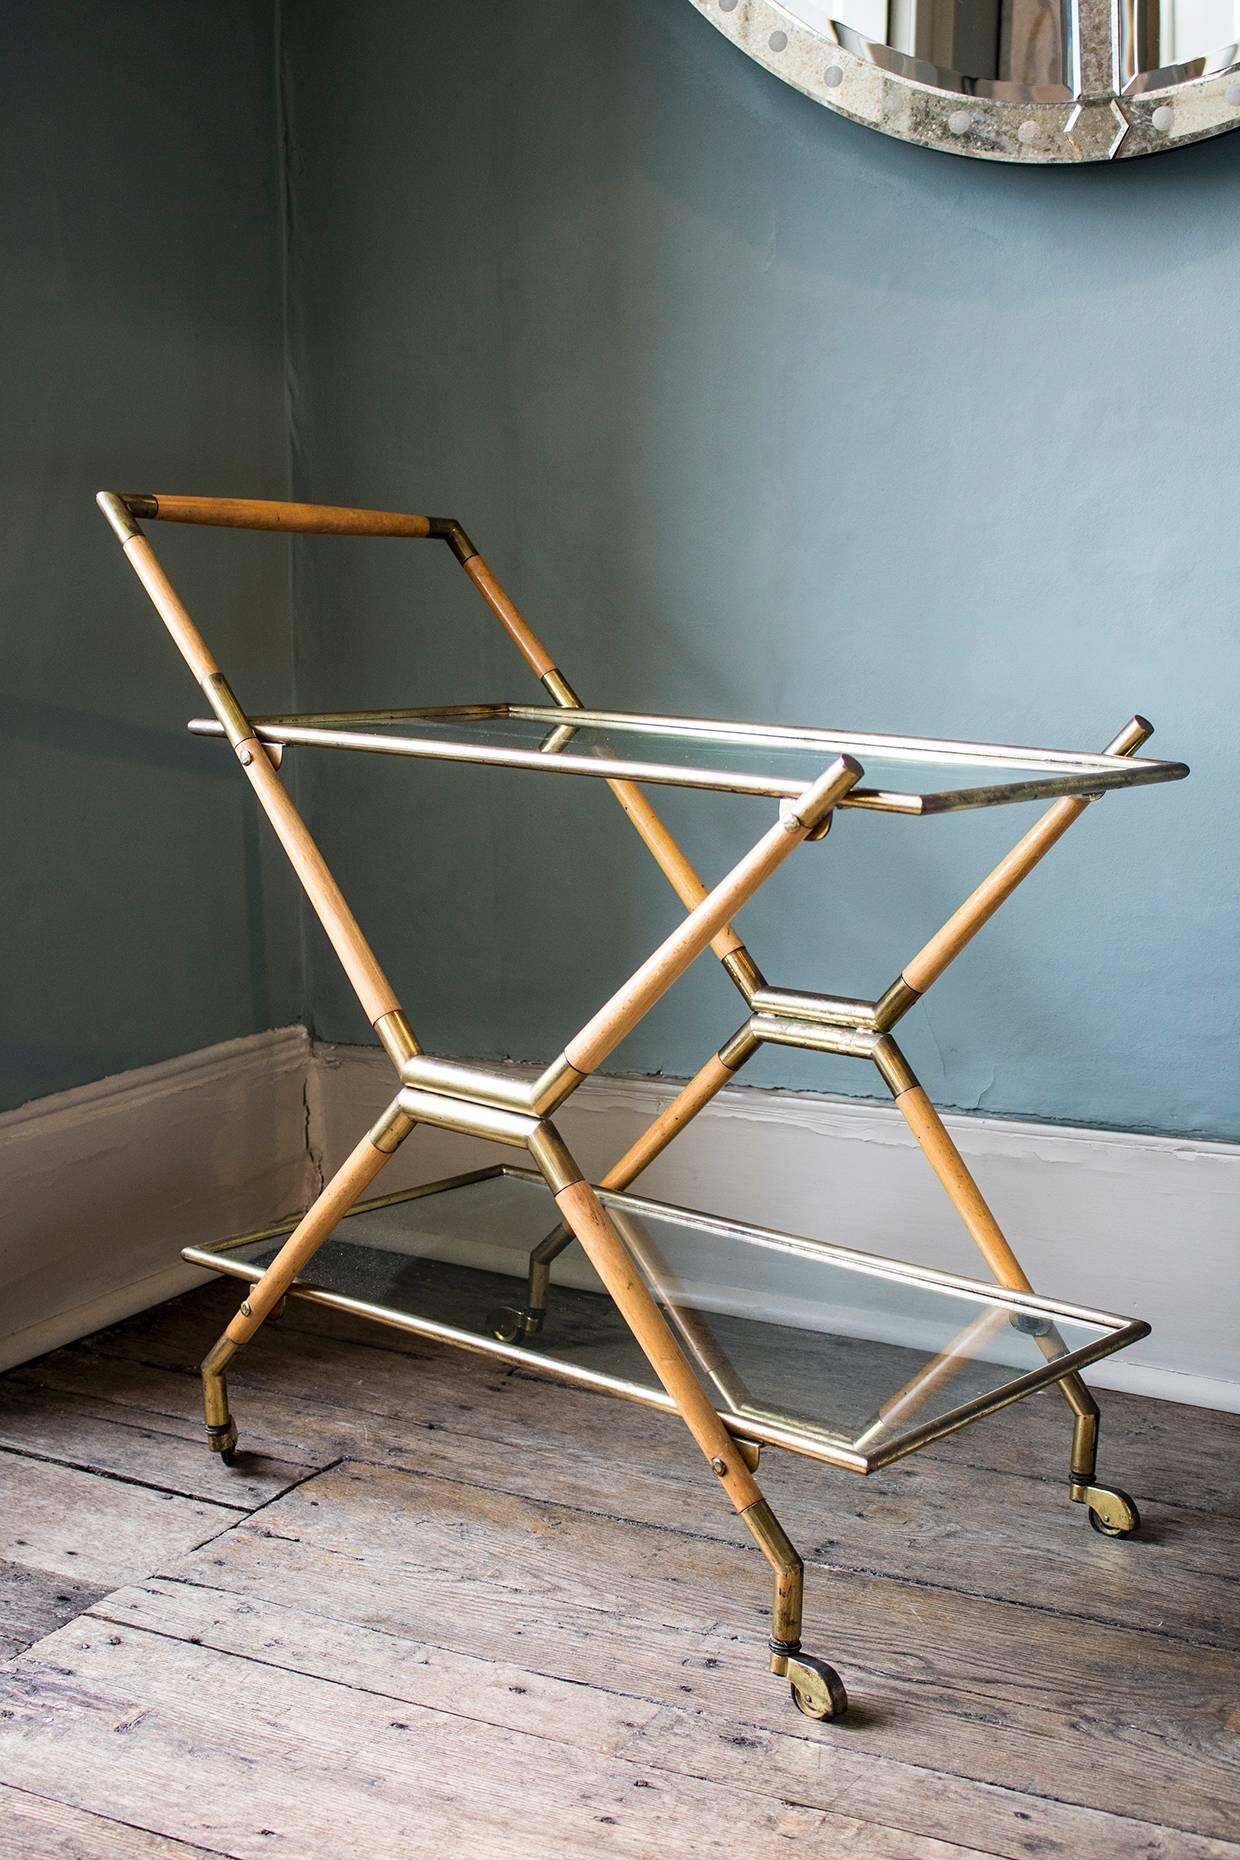 Bar cart/drinks trolley in glass, brass and wood,
circa 1950s.